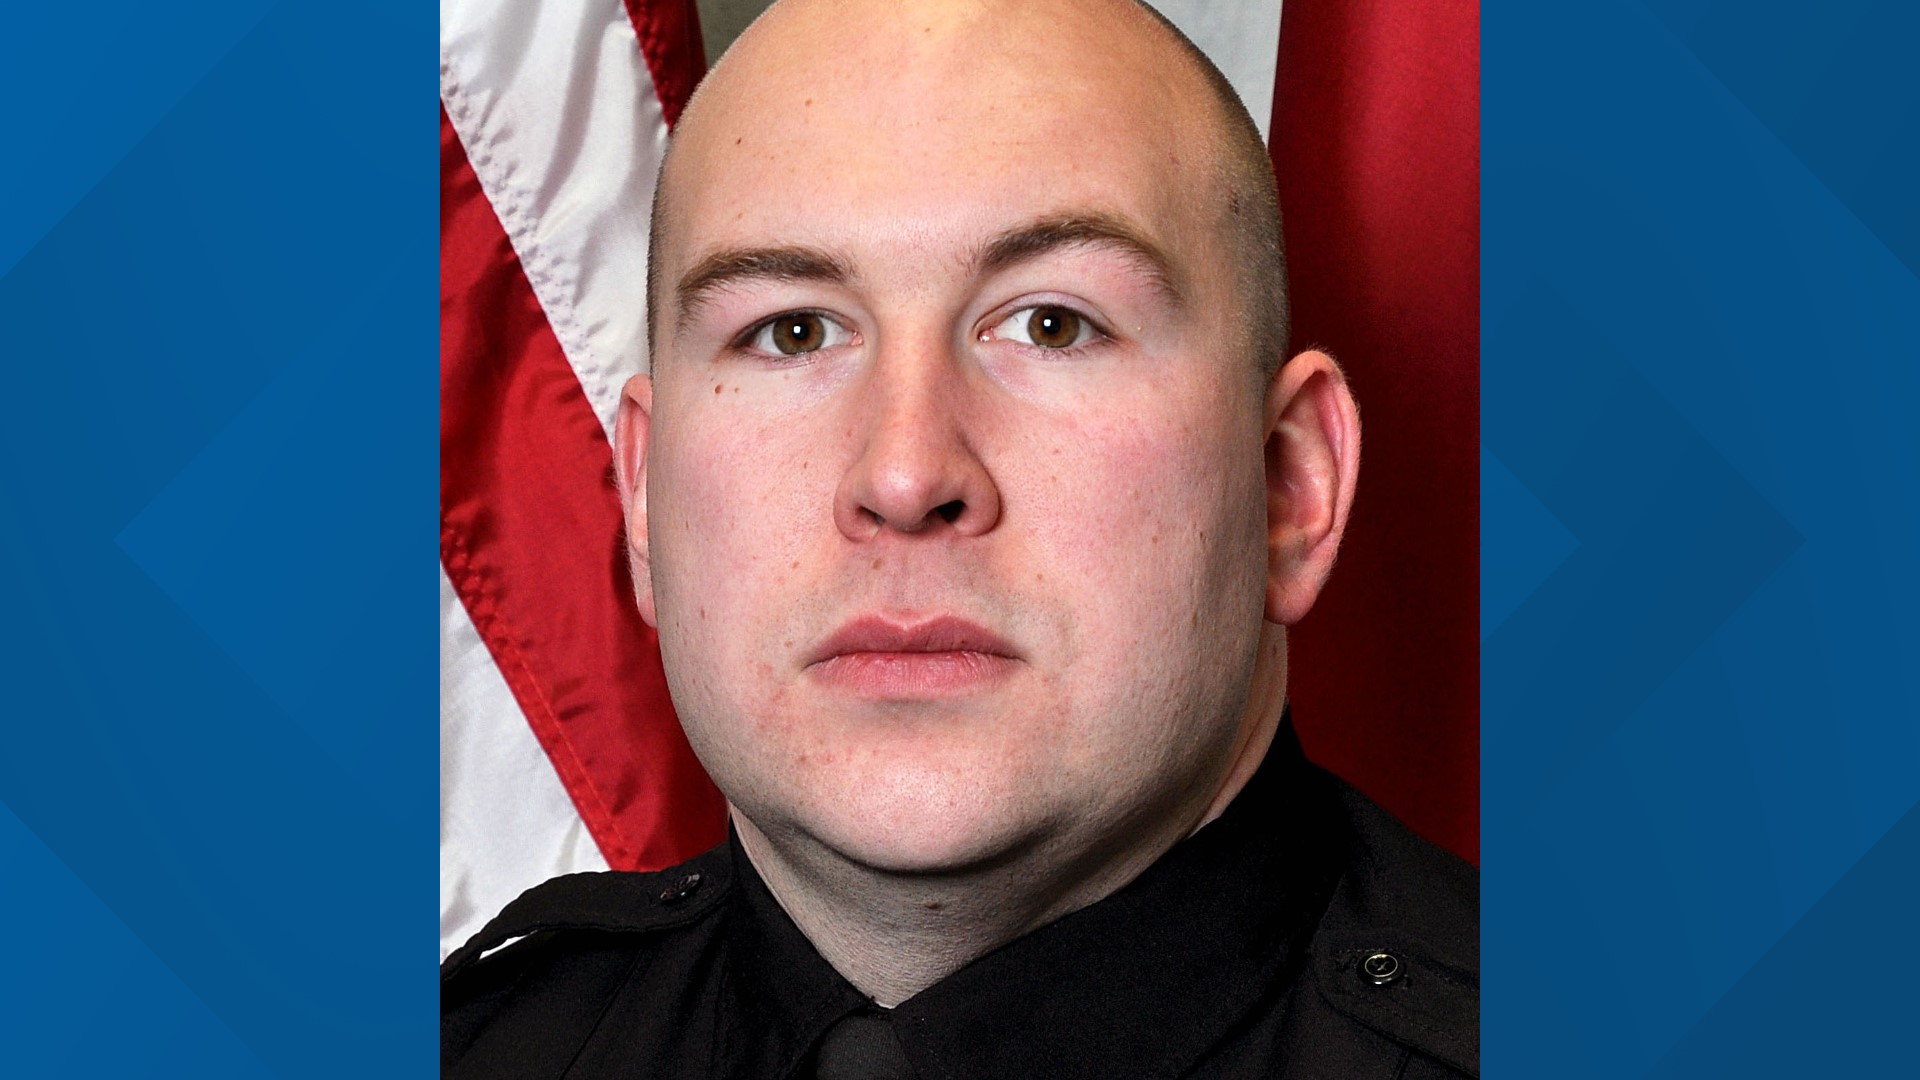 Officer Jesse Hillis resigned just 3 days before he was charged with solicitation of prostitution.